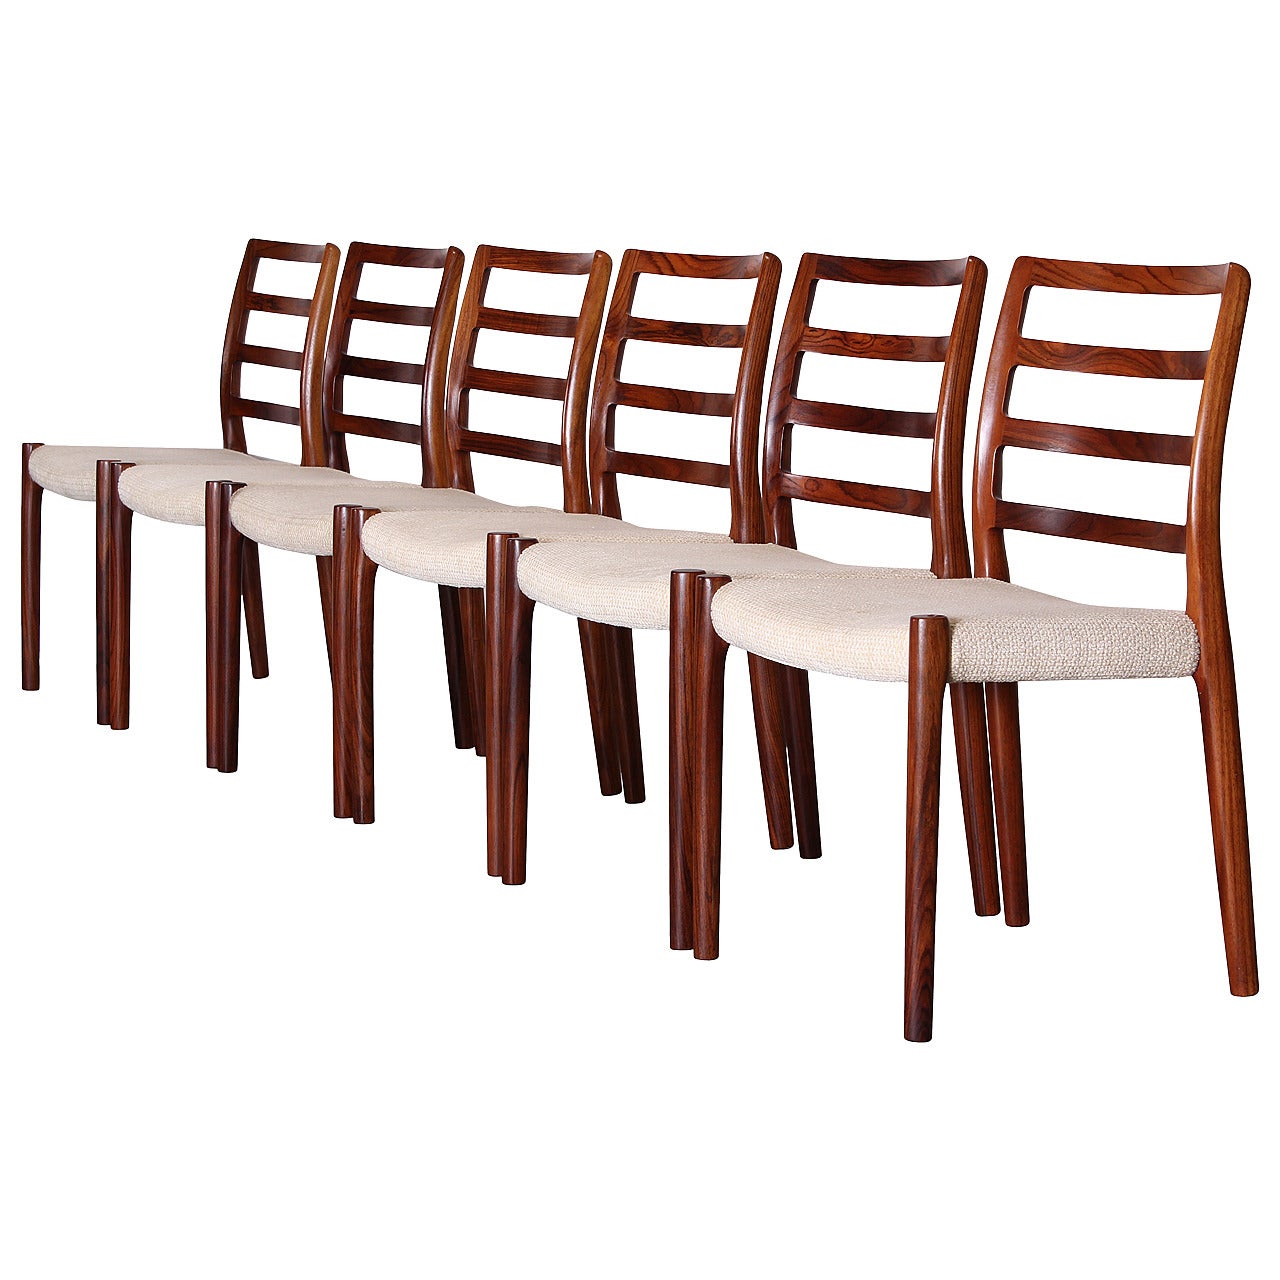 Set of 6 Rosewood Dining Chairs by Niels O. Moller for J.L.Moller Model #85